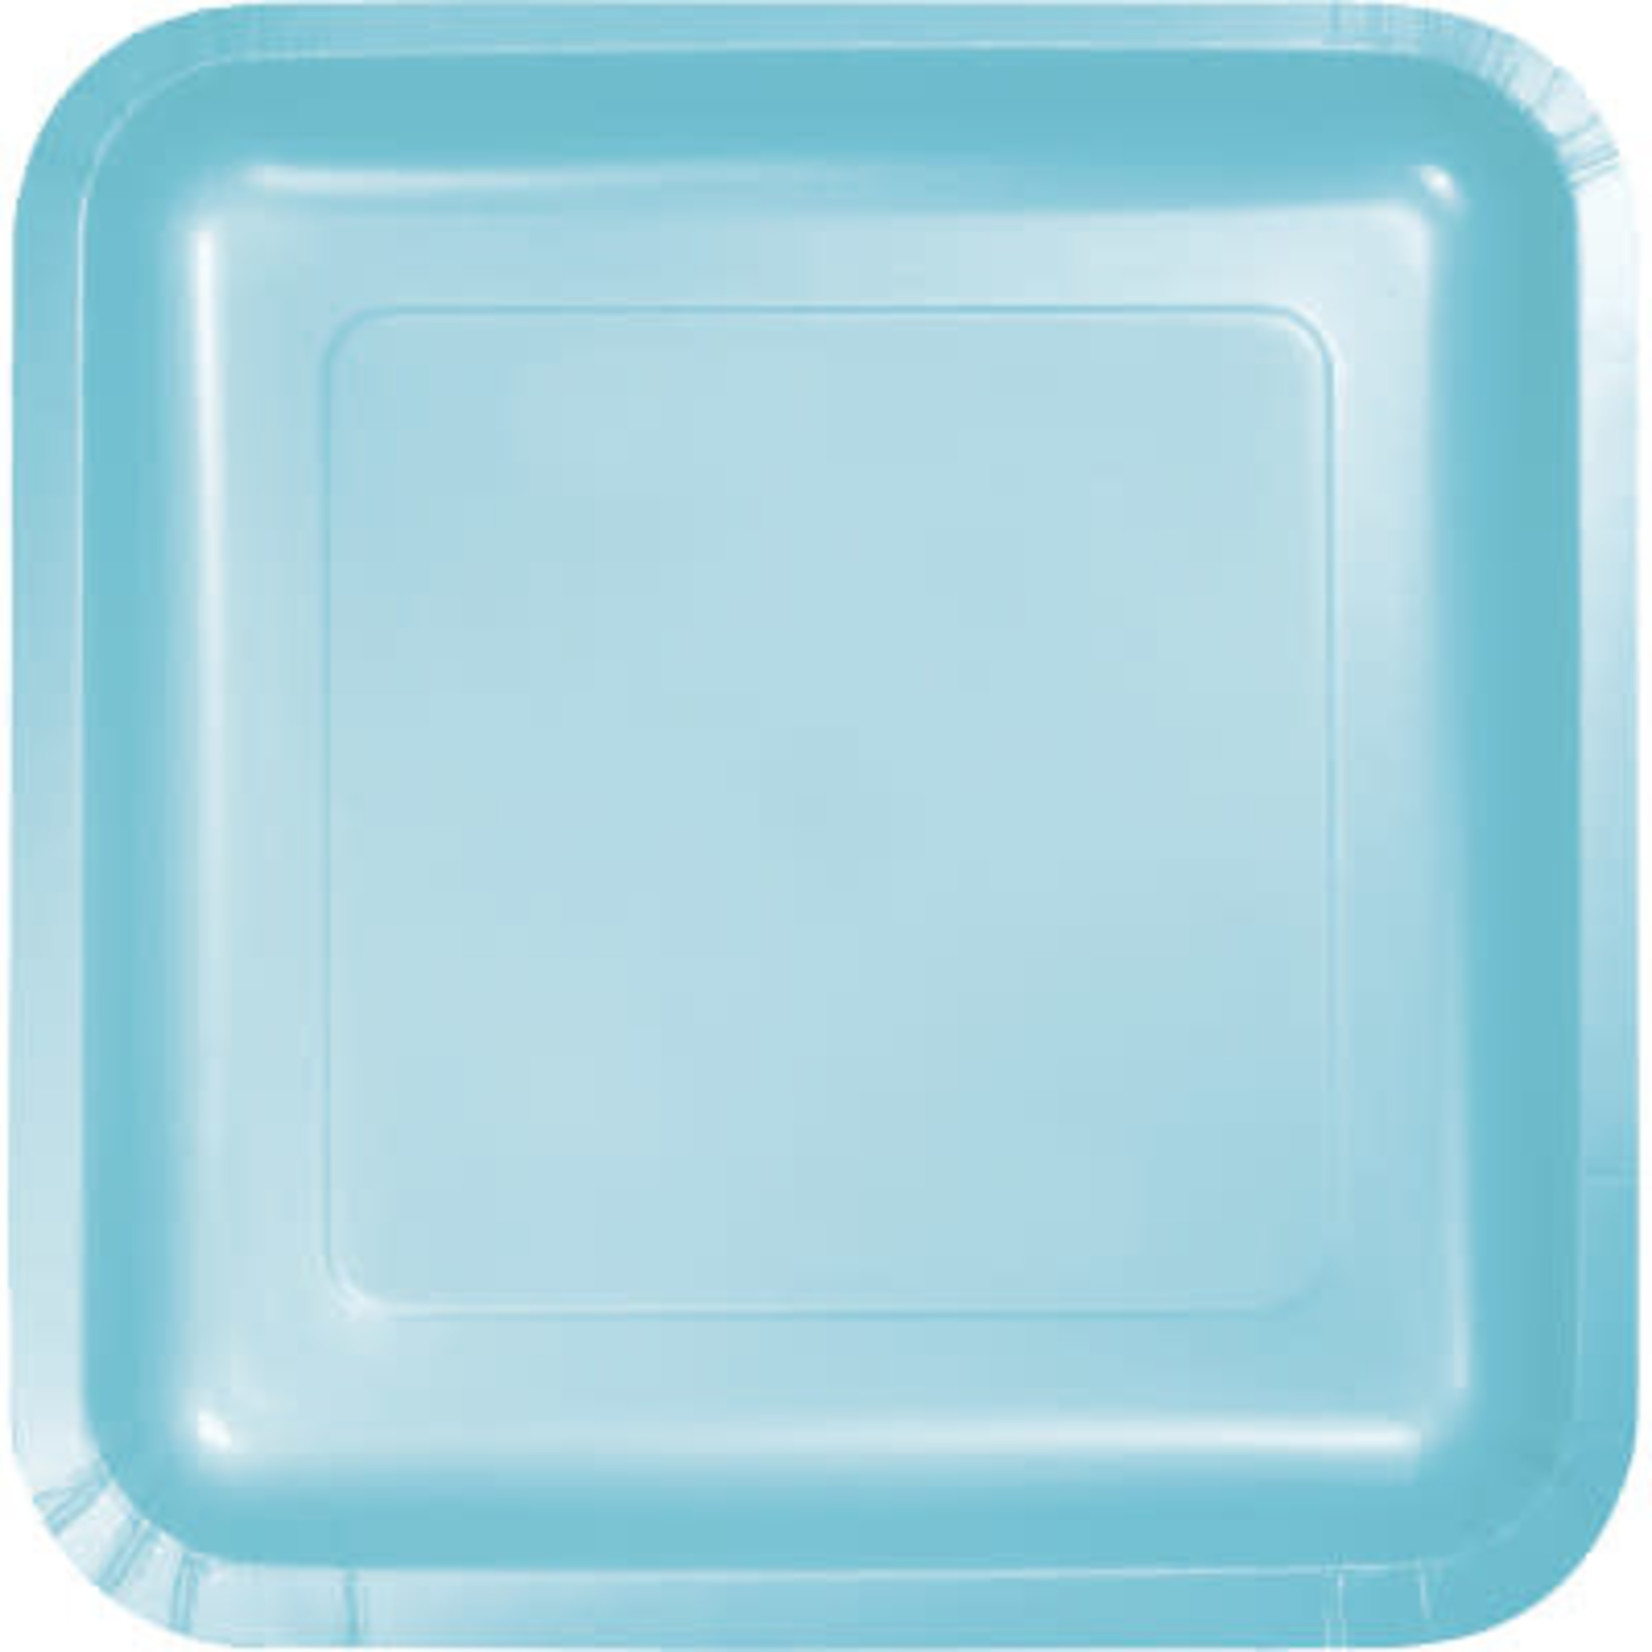 Touch of Color 7" Pastel Blue Square Paper Plates - 18ct.